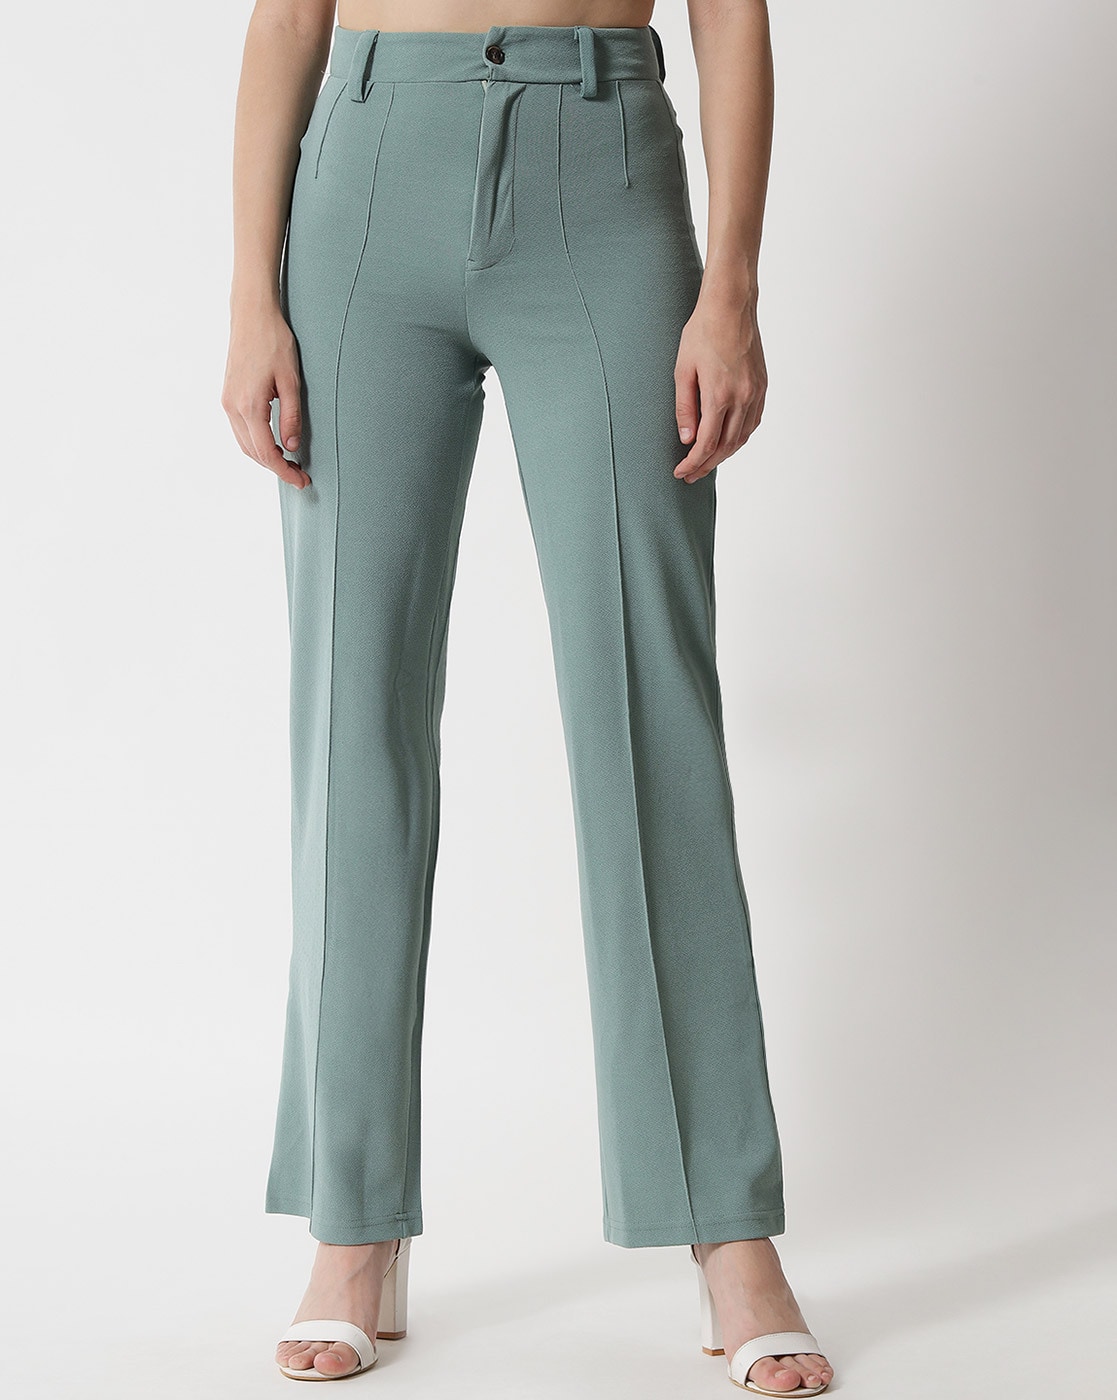 Buy Olive Green Trousers  Pants for Women by Fable Street Online  Ajiocom